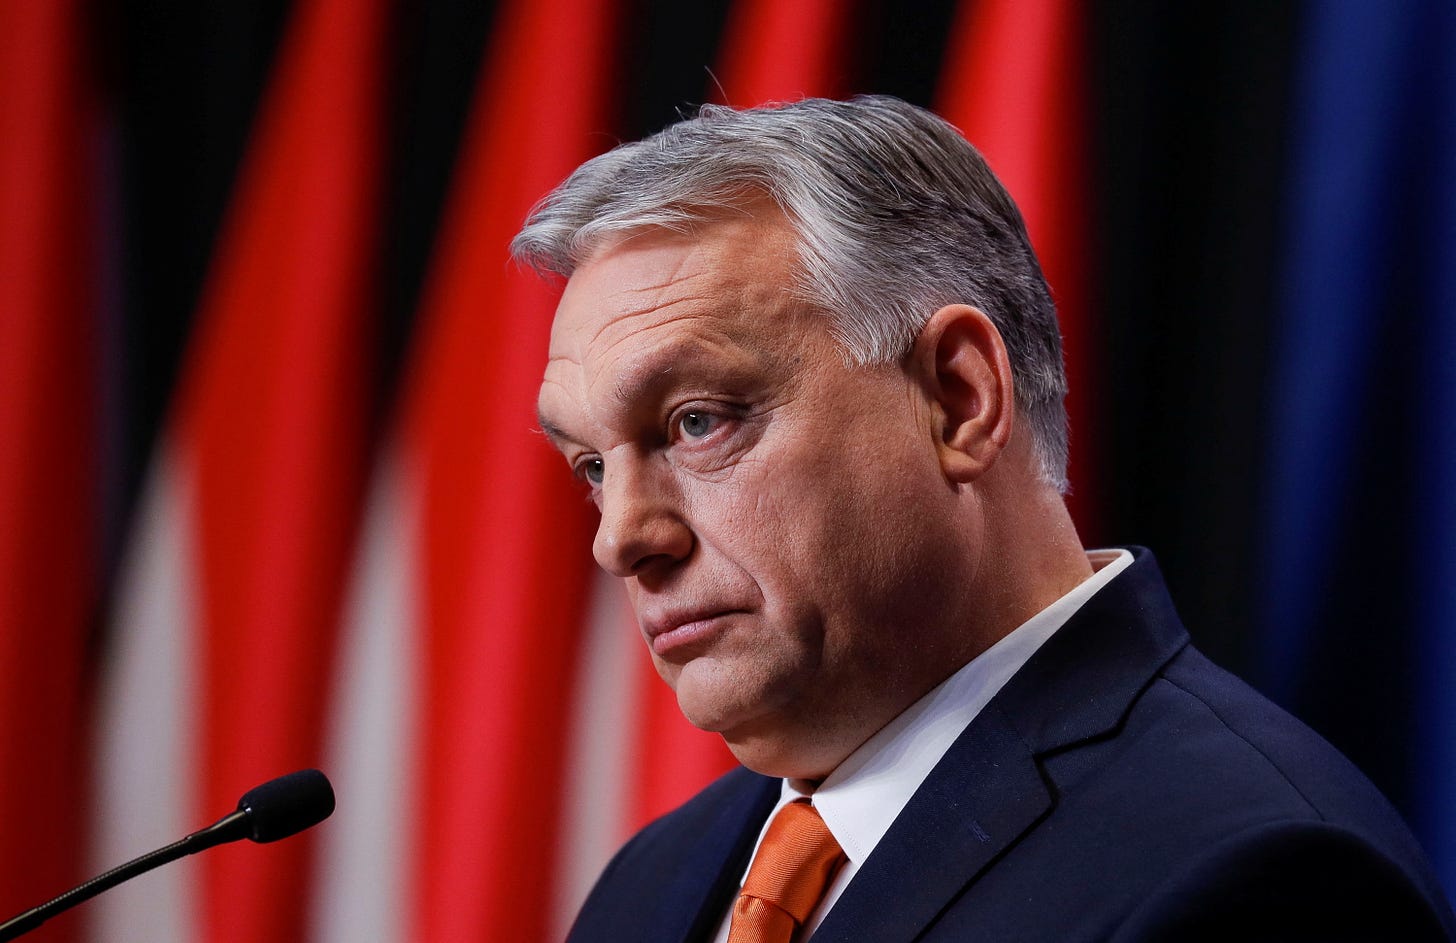 Explainer: What will the EU do about Hungary's Orban? | Reuters